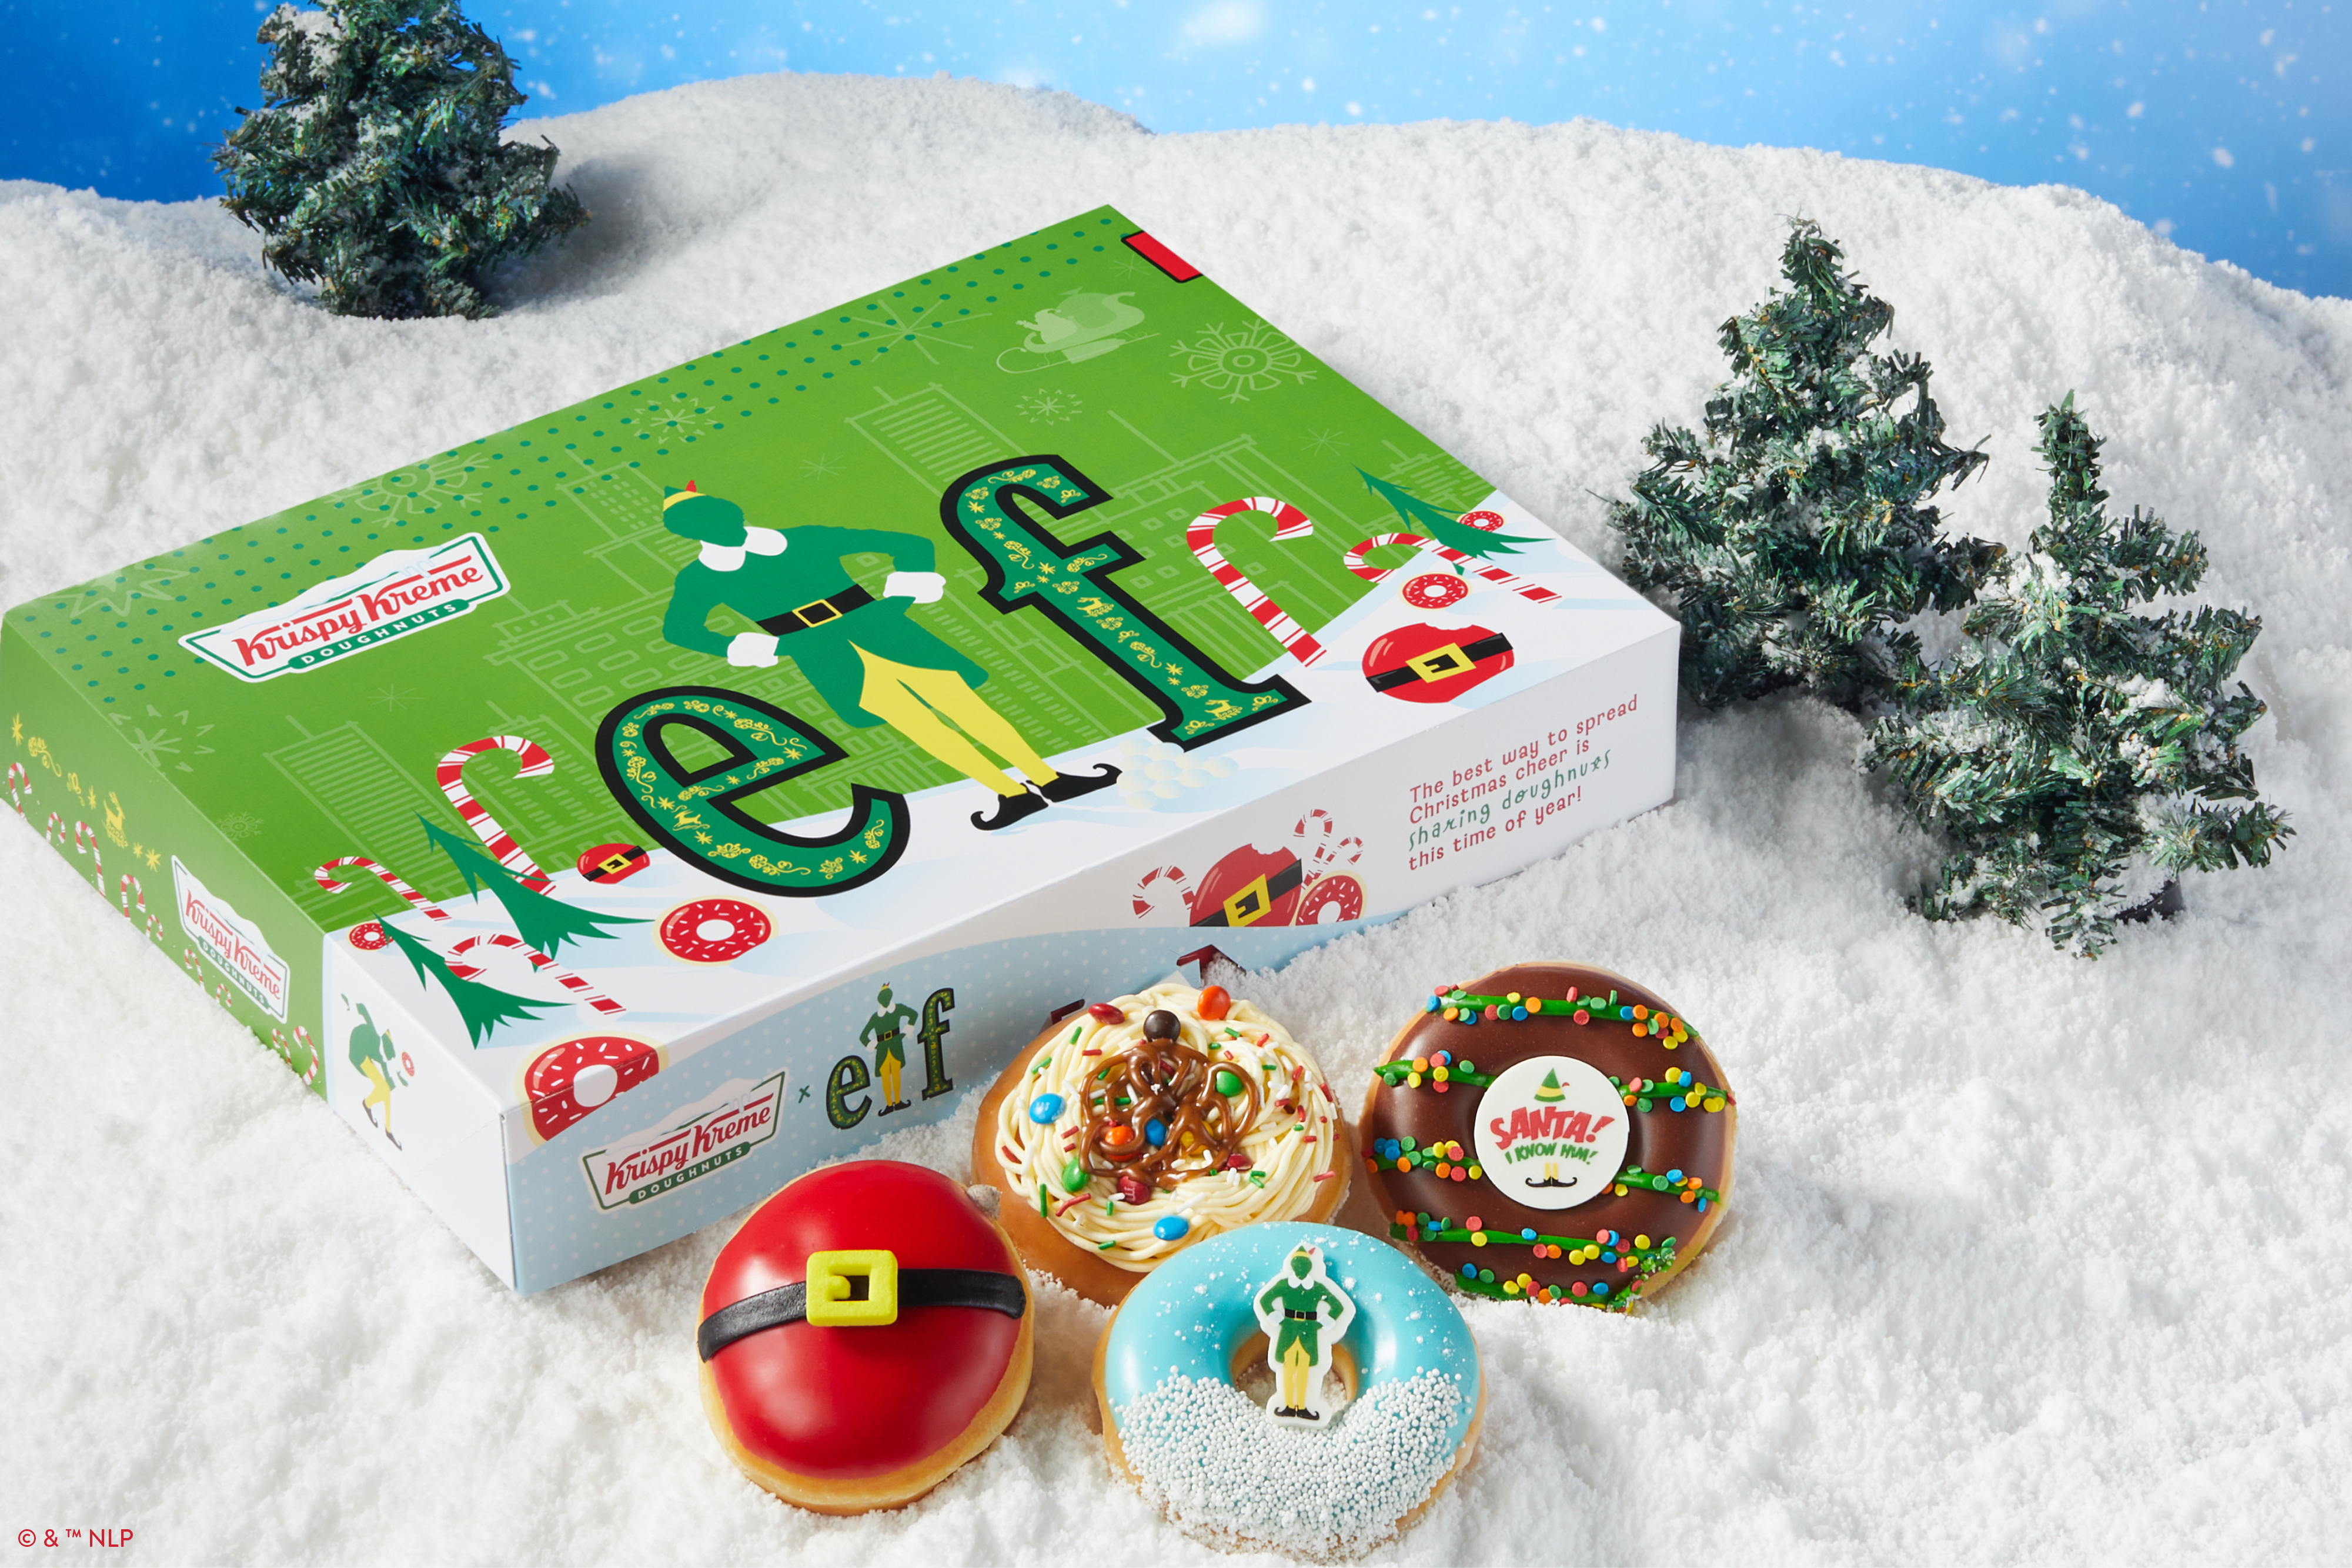 A box of Elf-themed Krispy Kreme donuts on a bed of snow.